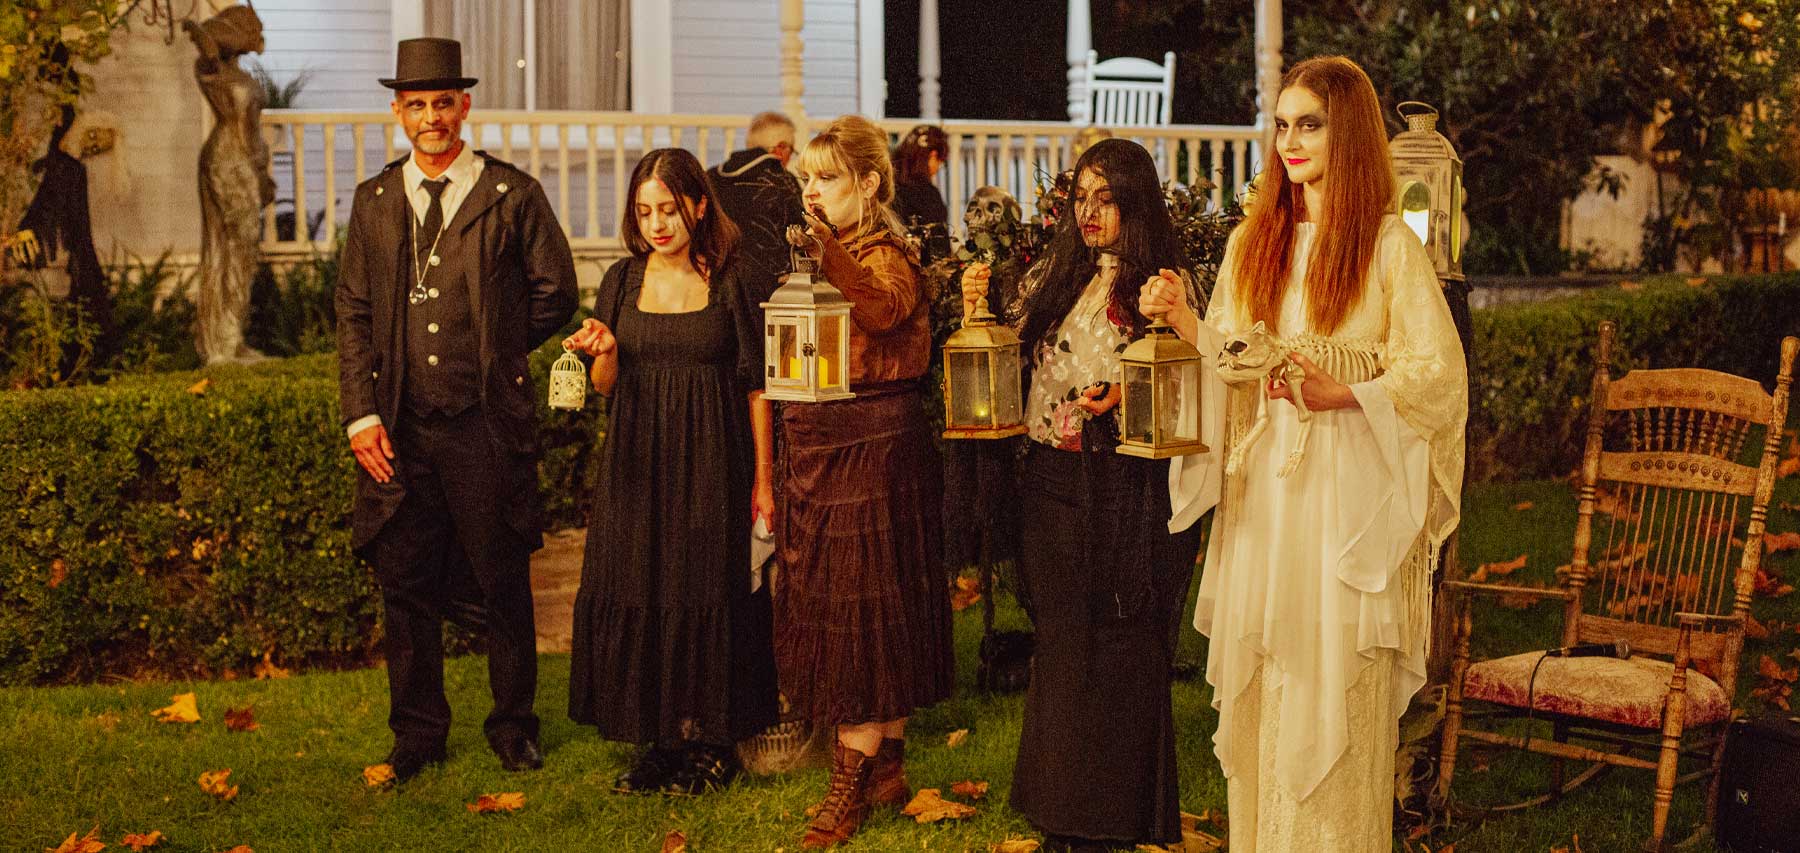 Legends of the Fall and Harvest Dinner: A Spooky Culinary Adventure in San Juan Capistrano